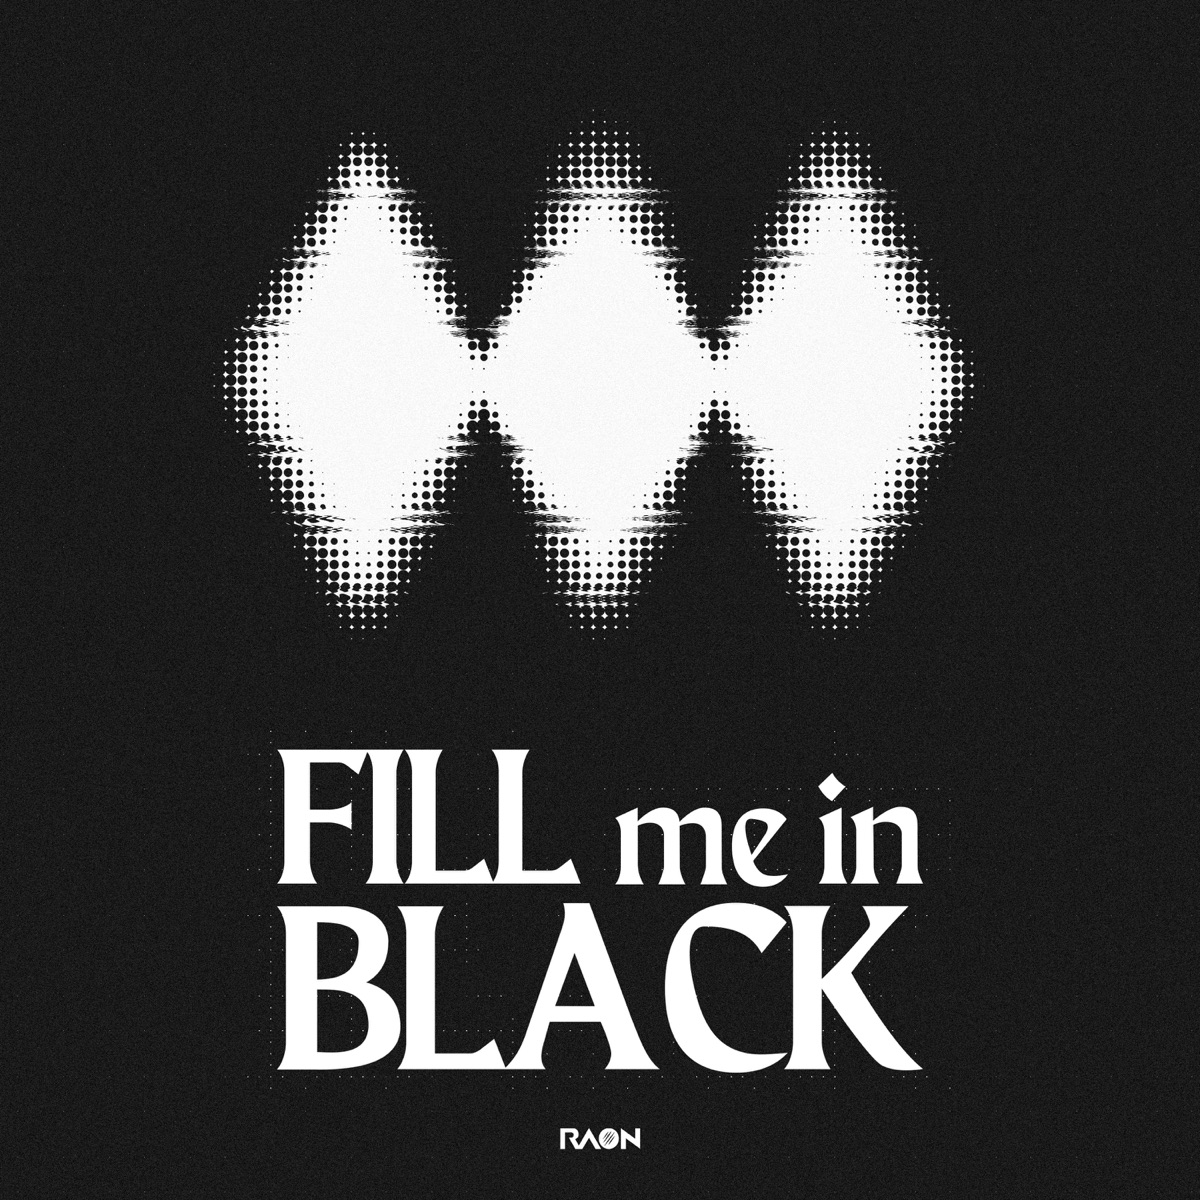 Cover art for『Raon - FILL me in BLACK』from the release『FILL me in BLACK